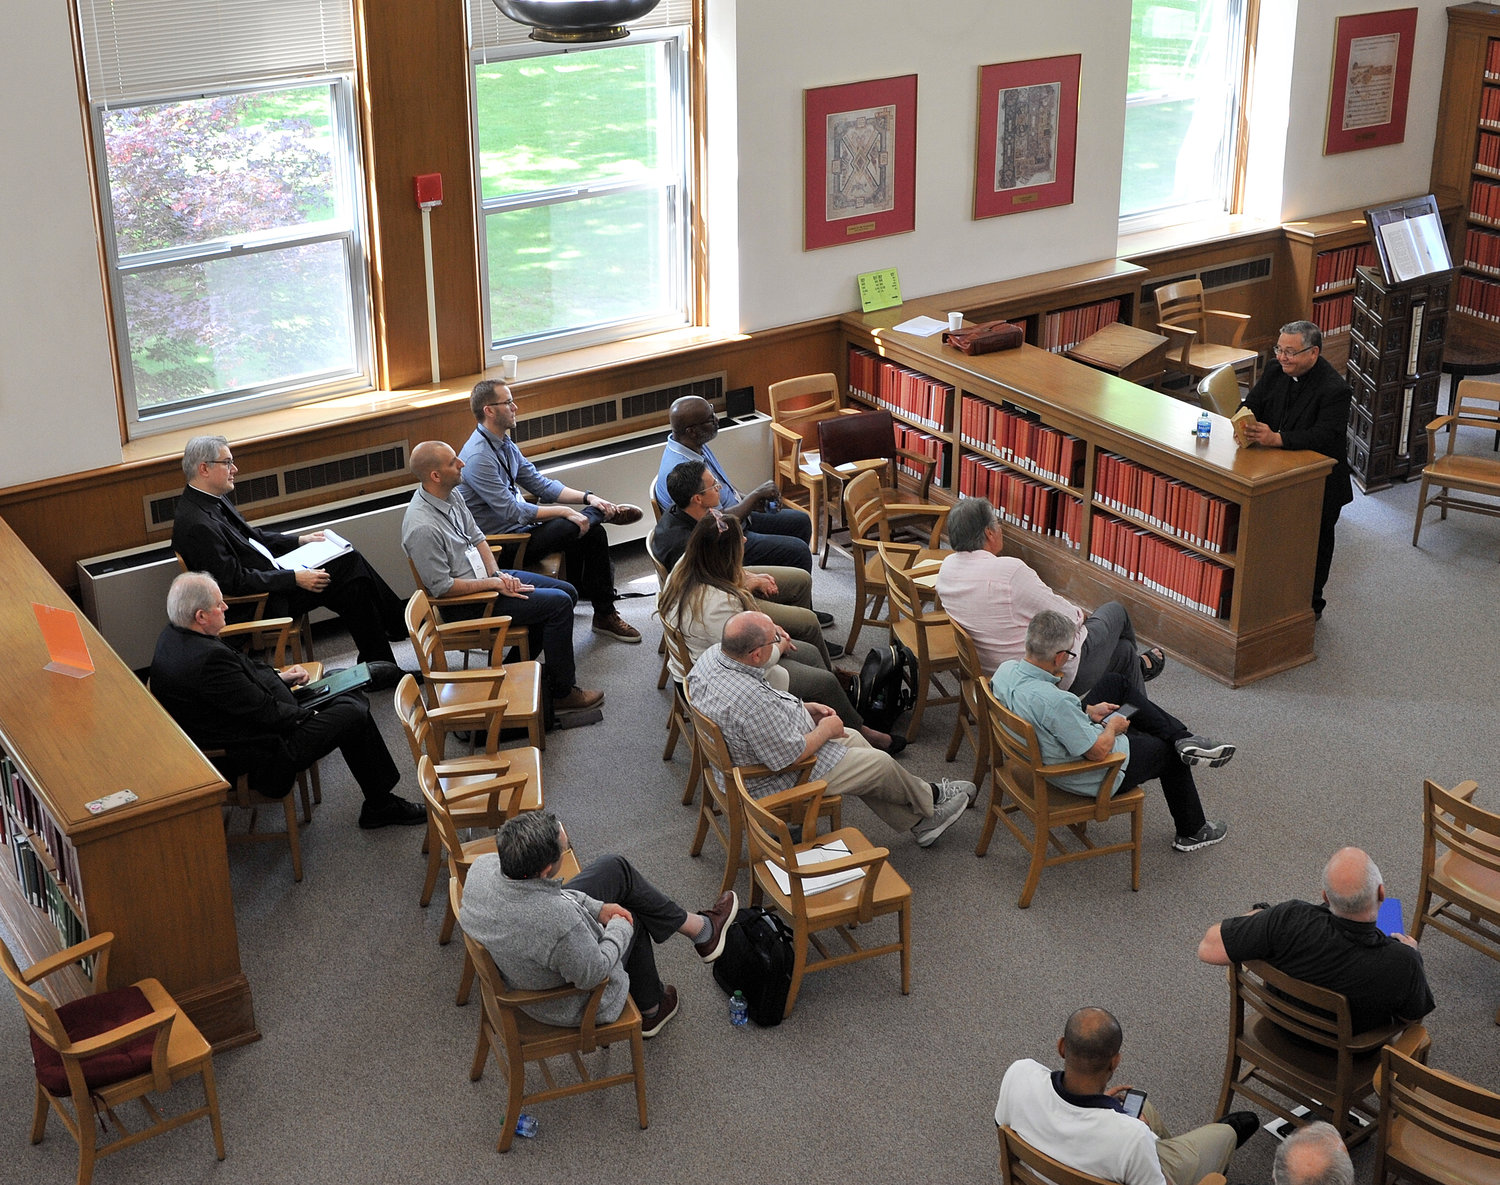 ECUMENICAL MEETING—Auxiliary Bishop Eduardo Nevares of the Diocese of Phoenix, Ariz., gives a presentation to Catholic and Evangelical members of the John 17 Movement at St. Joseph’s Seminary in Dunwoodie June 10.